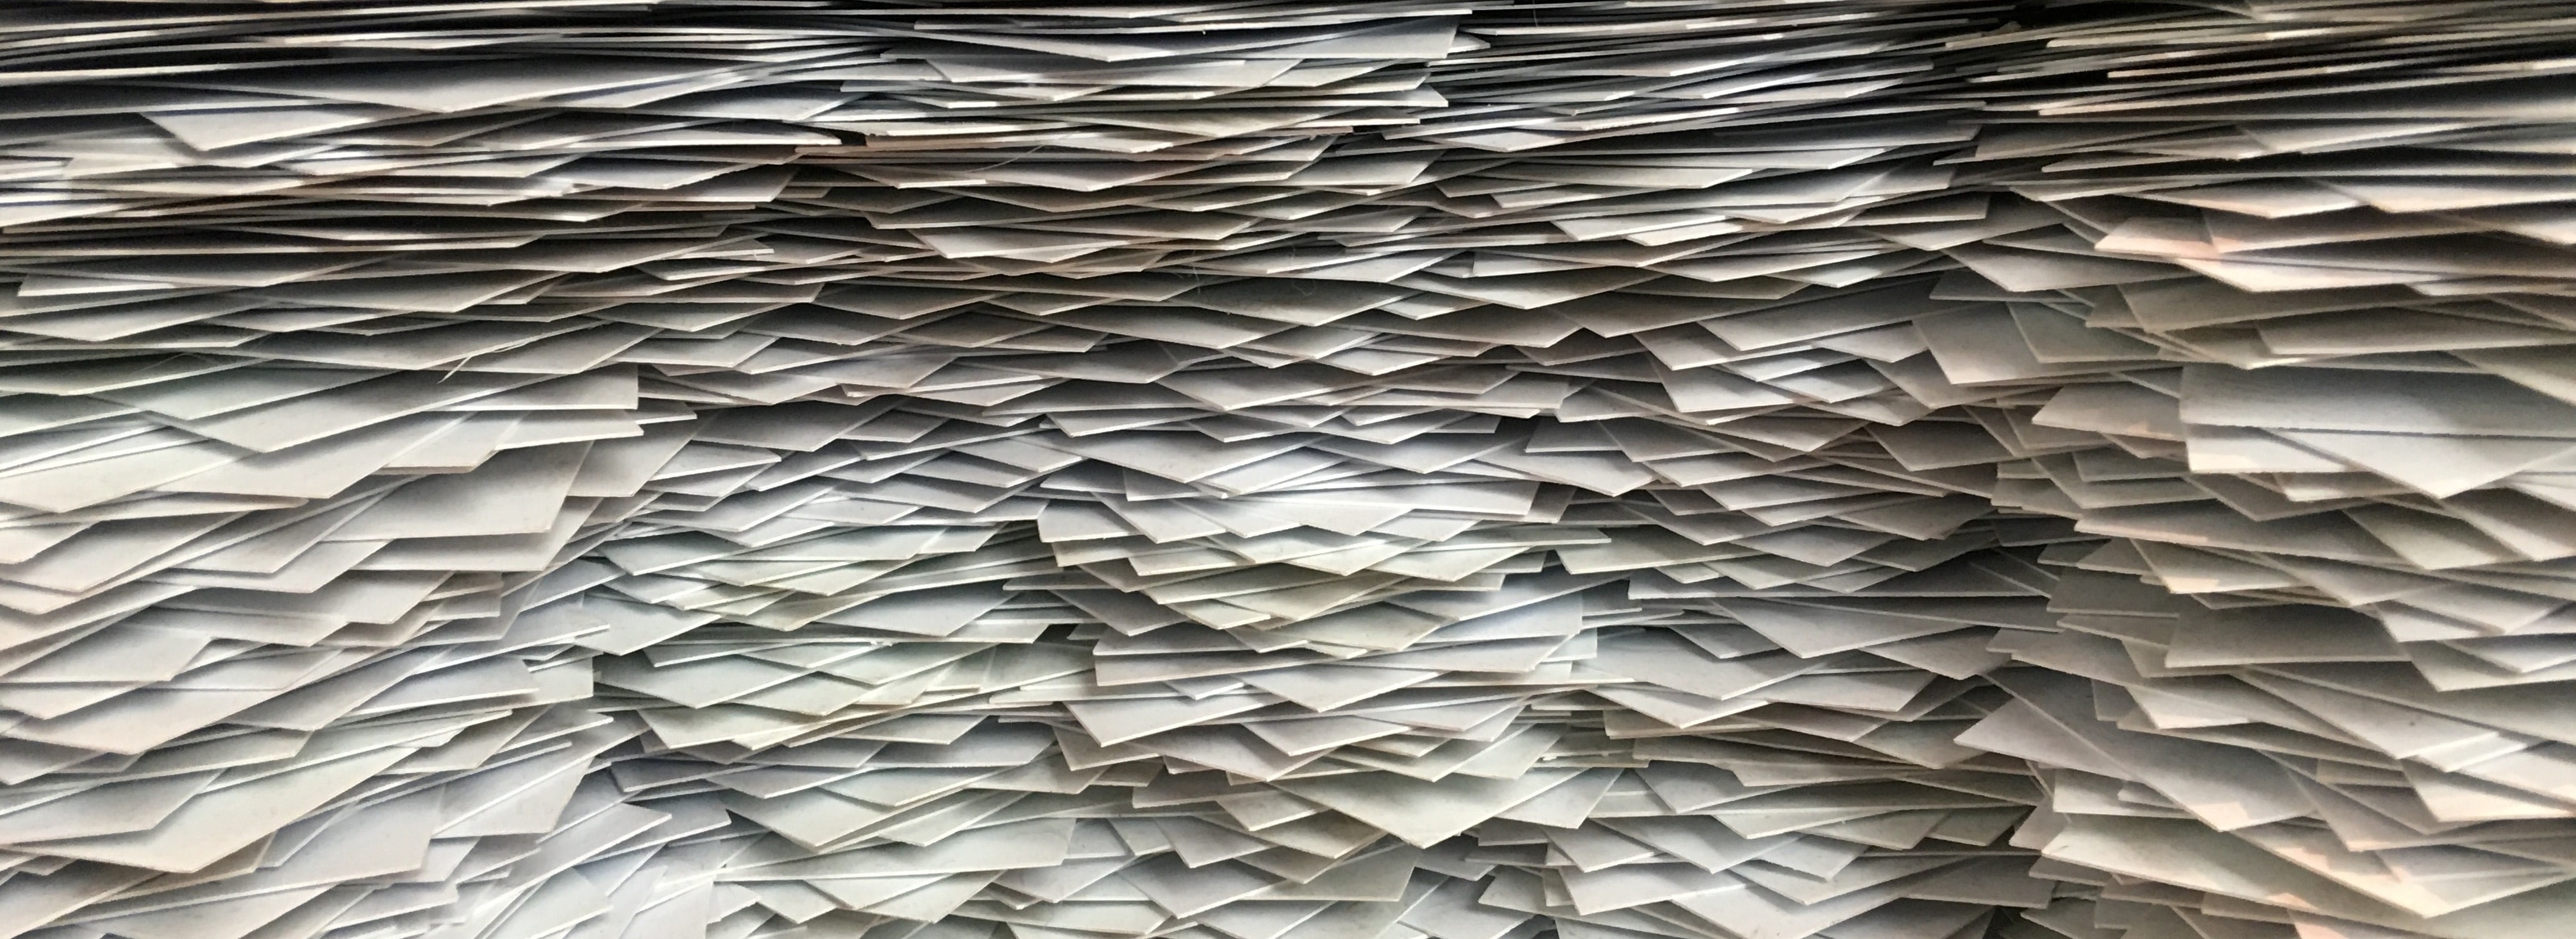 Photo of a stack of Papers